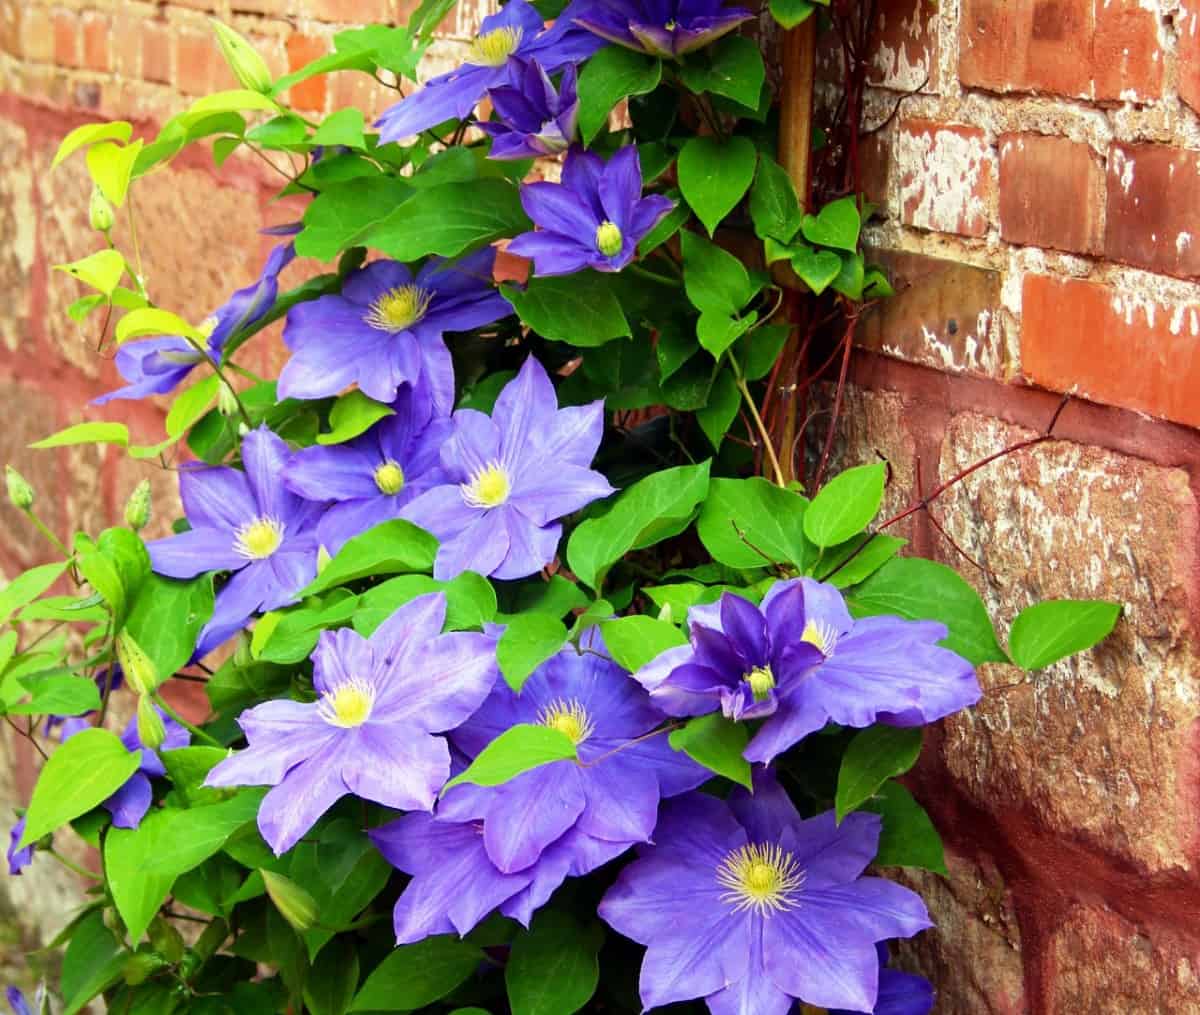 The clematis is a long-blooming flowering vine.